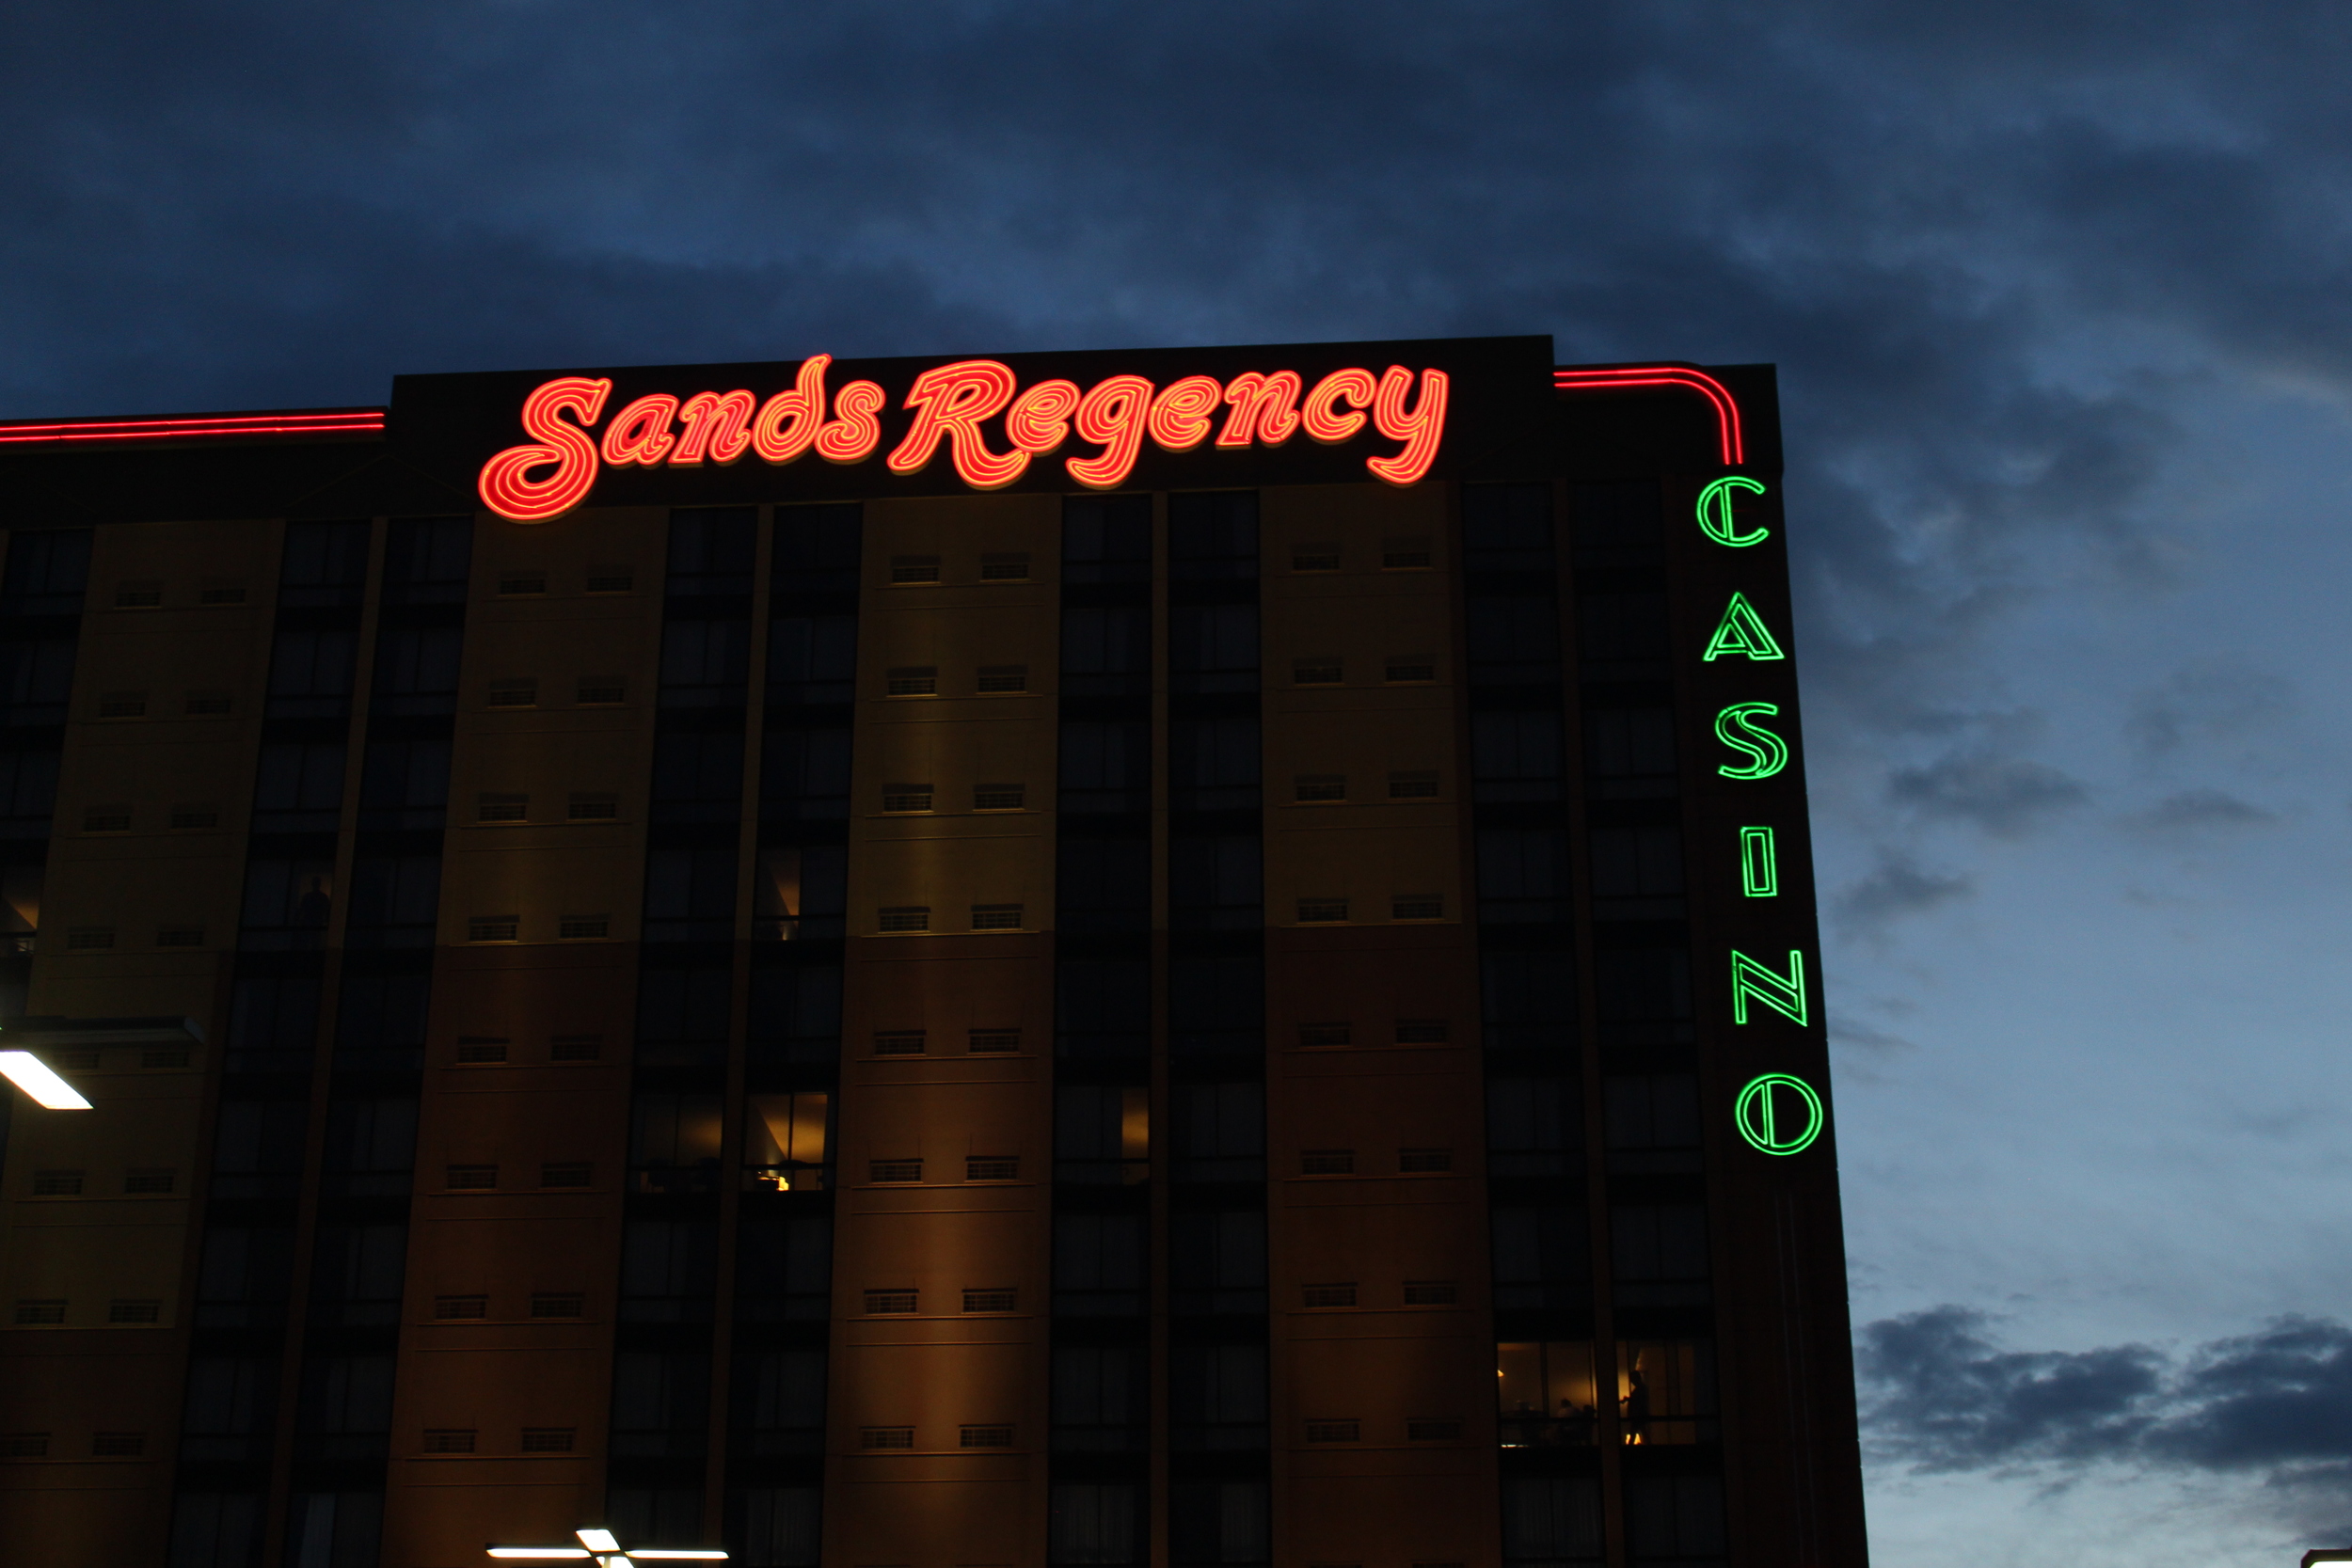 Sands Regency wall mounted signs, Reno, Nevada: photographic print